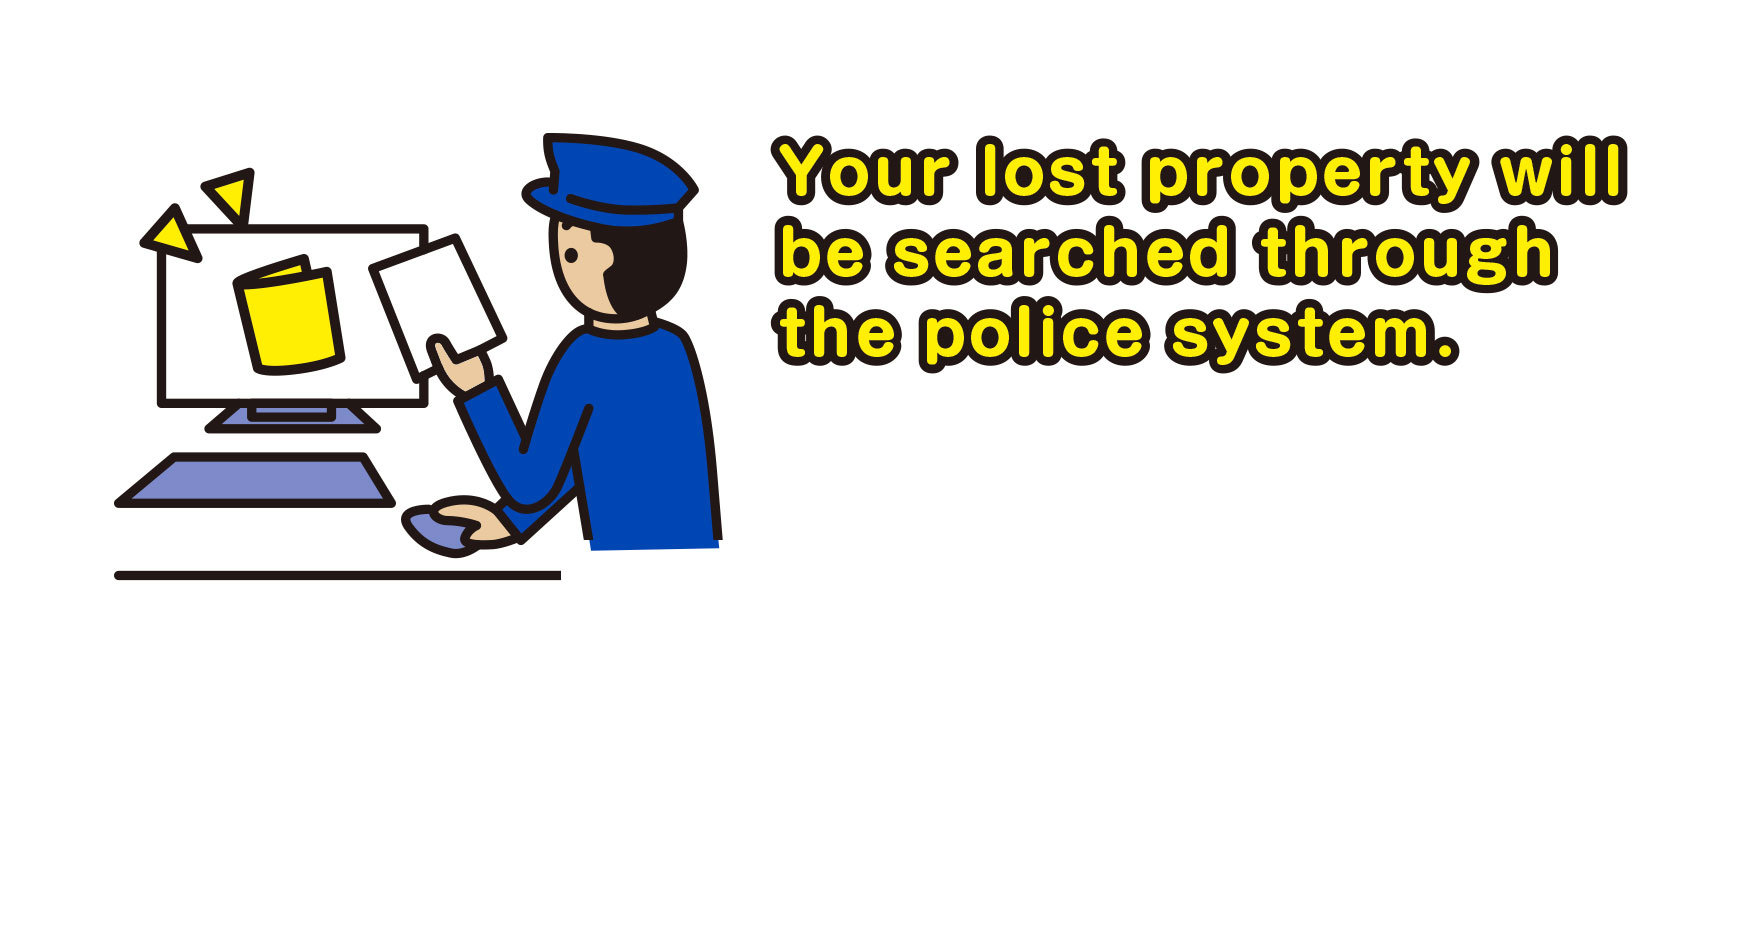 Your lost property will be searched through the police system.